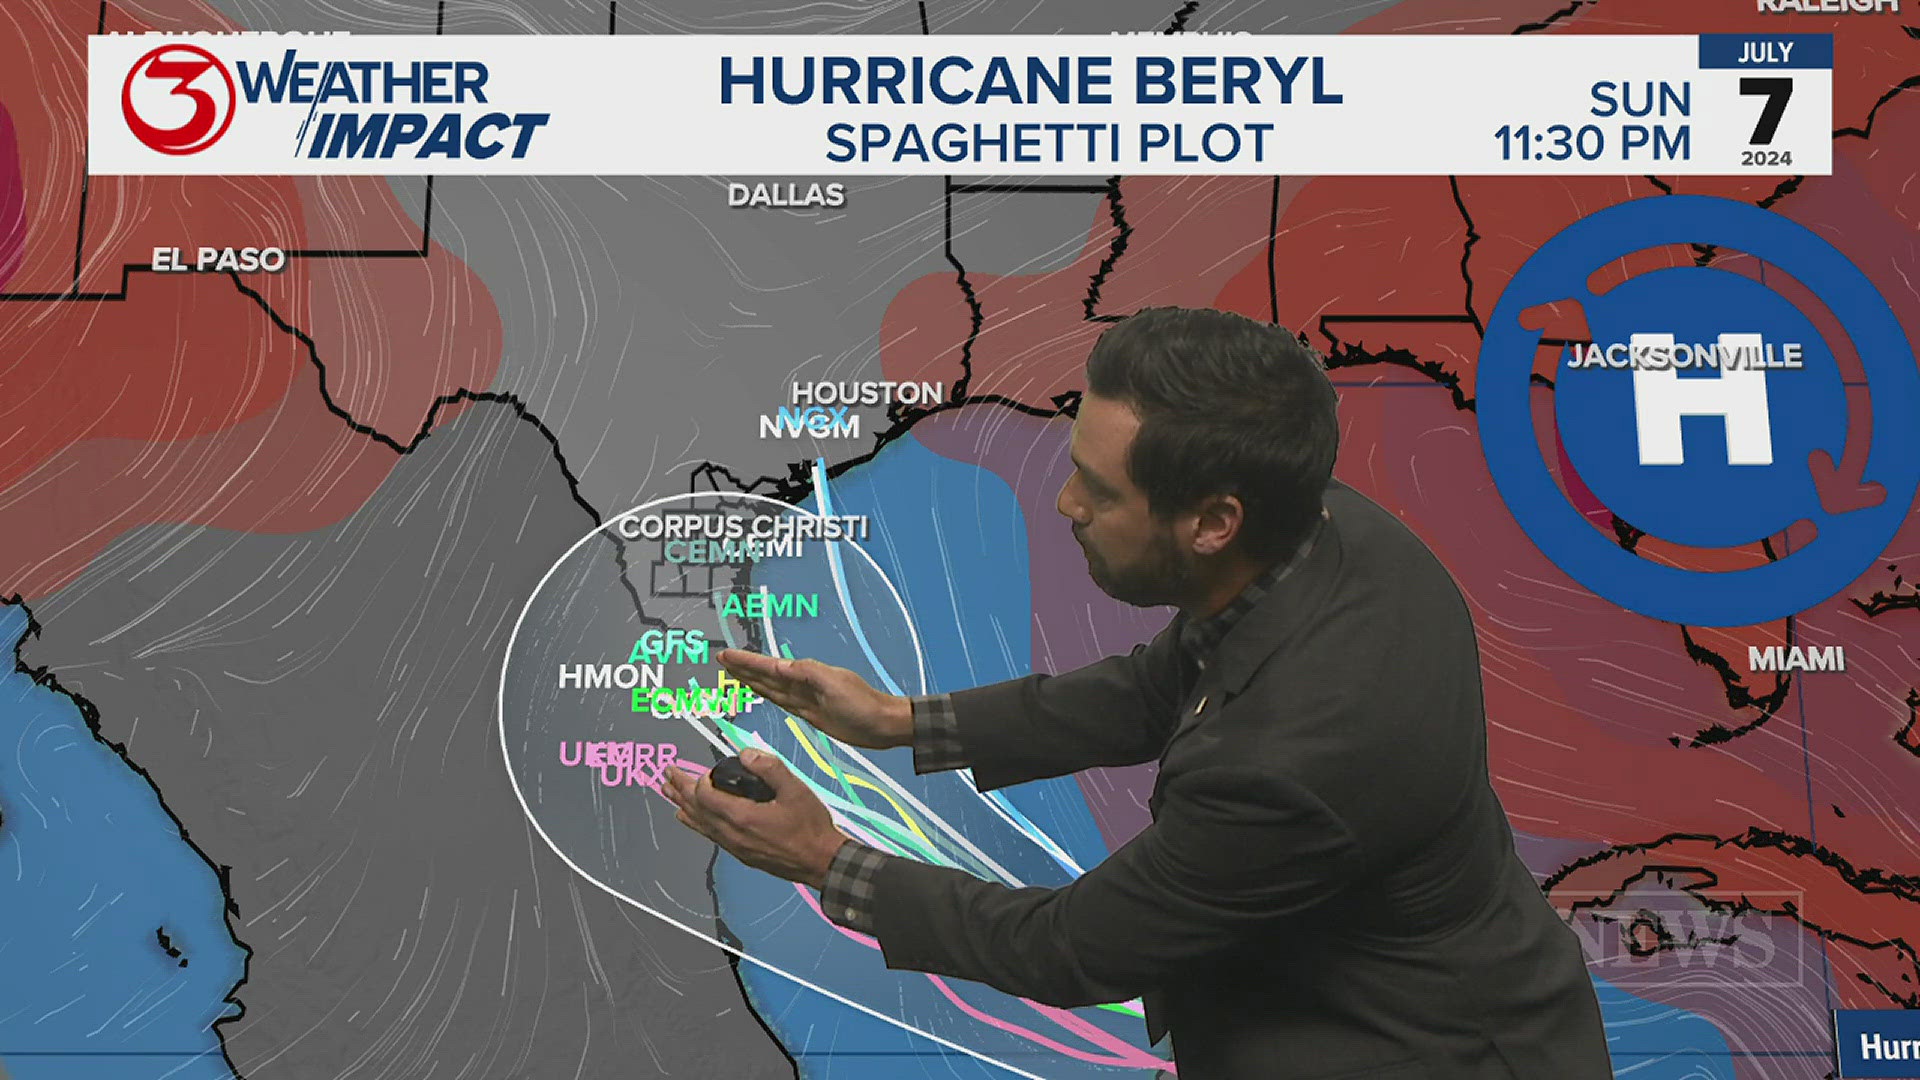 Will Hurricane Beryl hit Texas? There's still plenty of uncertainty in Beryl's path in the Gulf of Mexico; high pressure is likely to steer Beryl northwest.